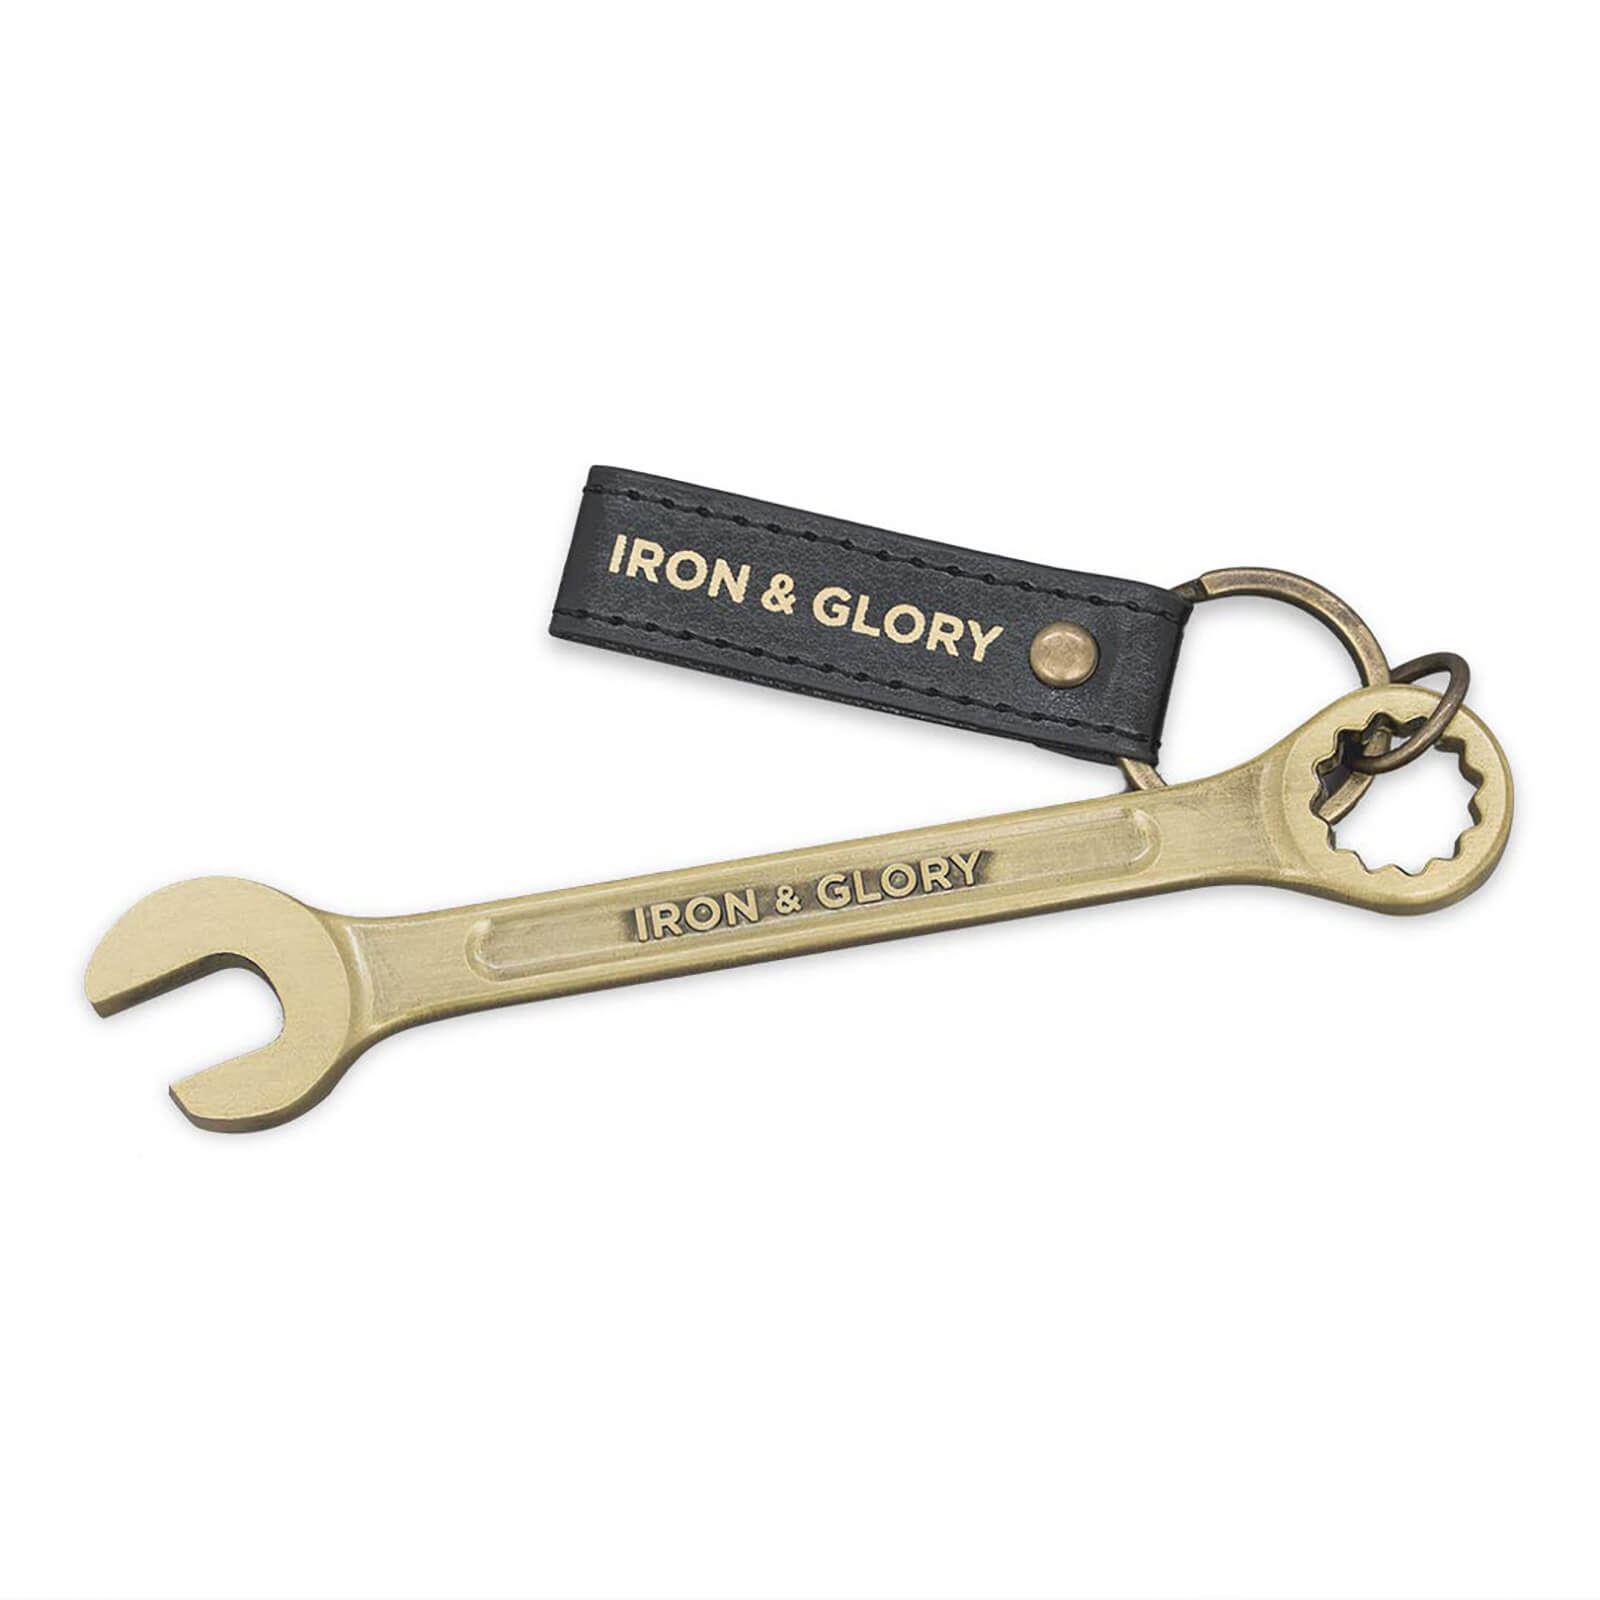 Photos - Other Souvenirs iRon & Glory Bottle Wrench IAGIAW 